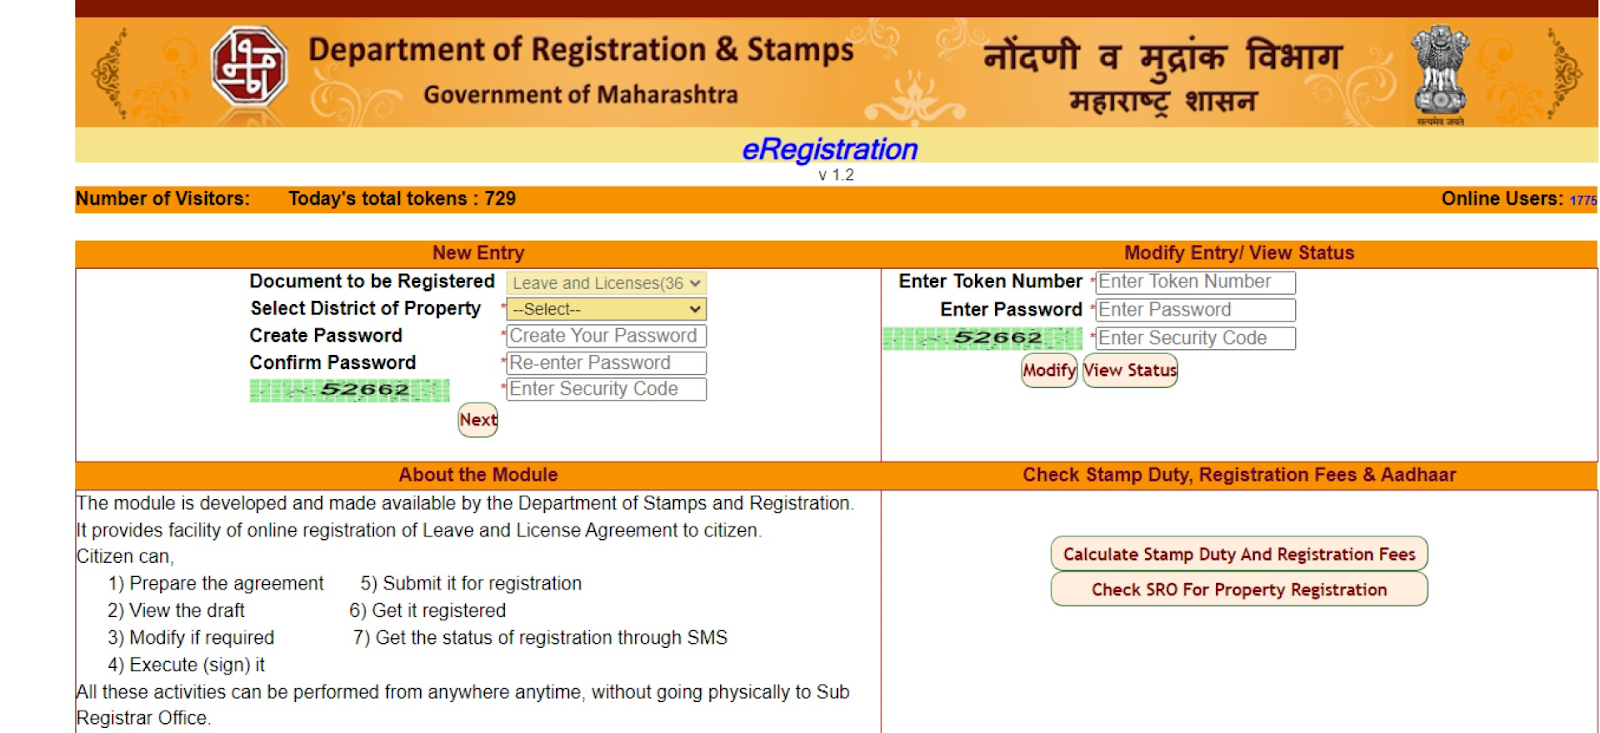 The necessary paperwork for the online registration procedure